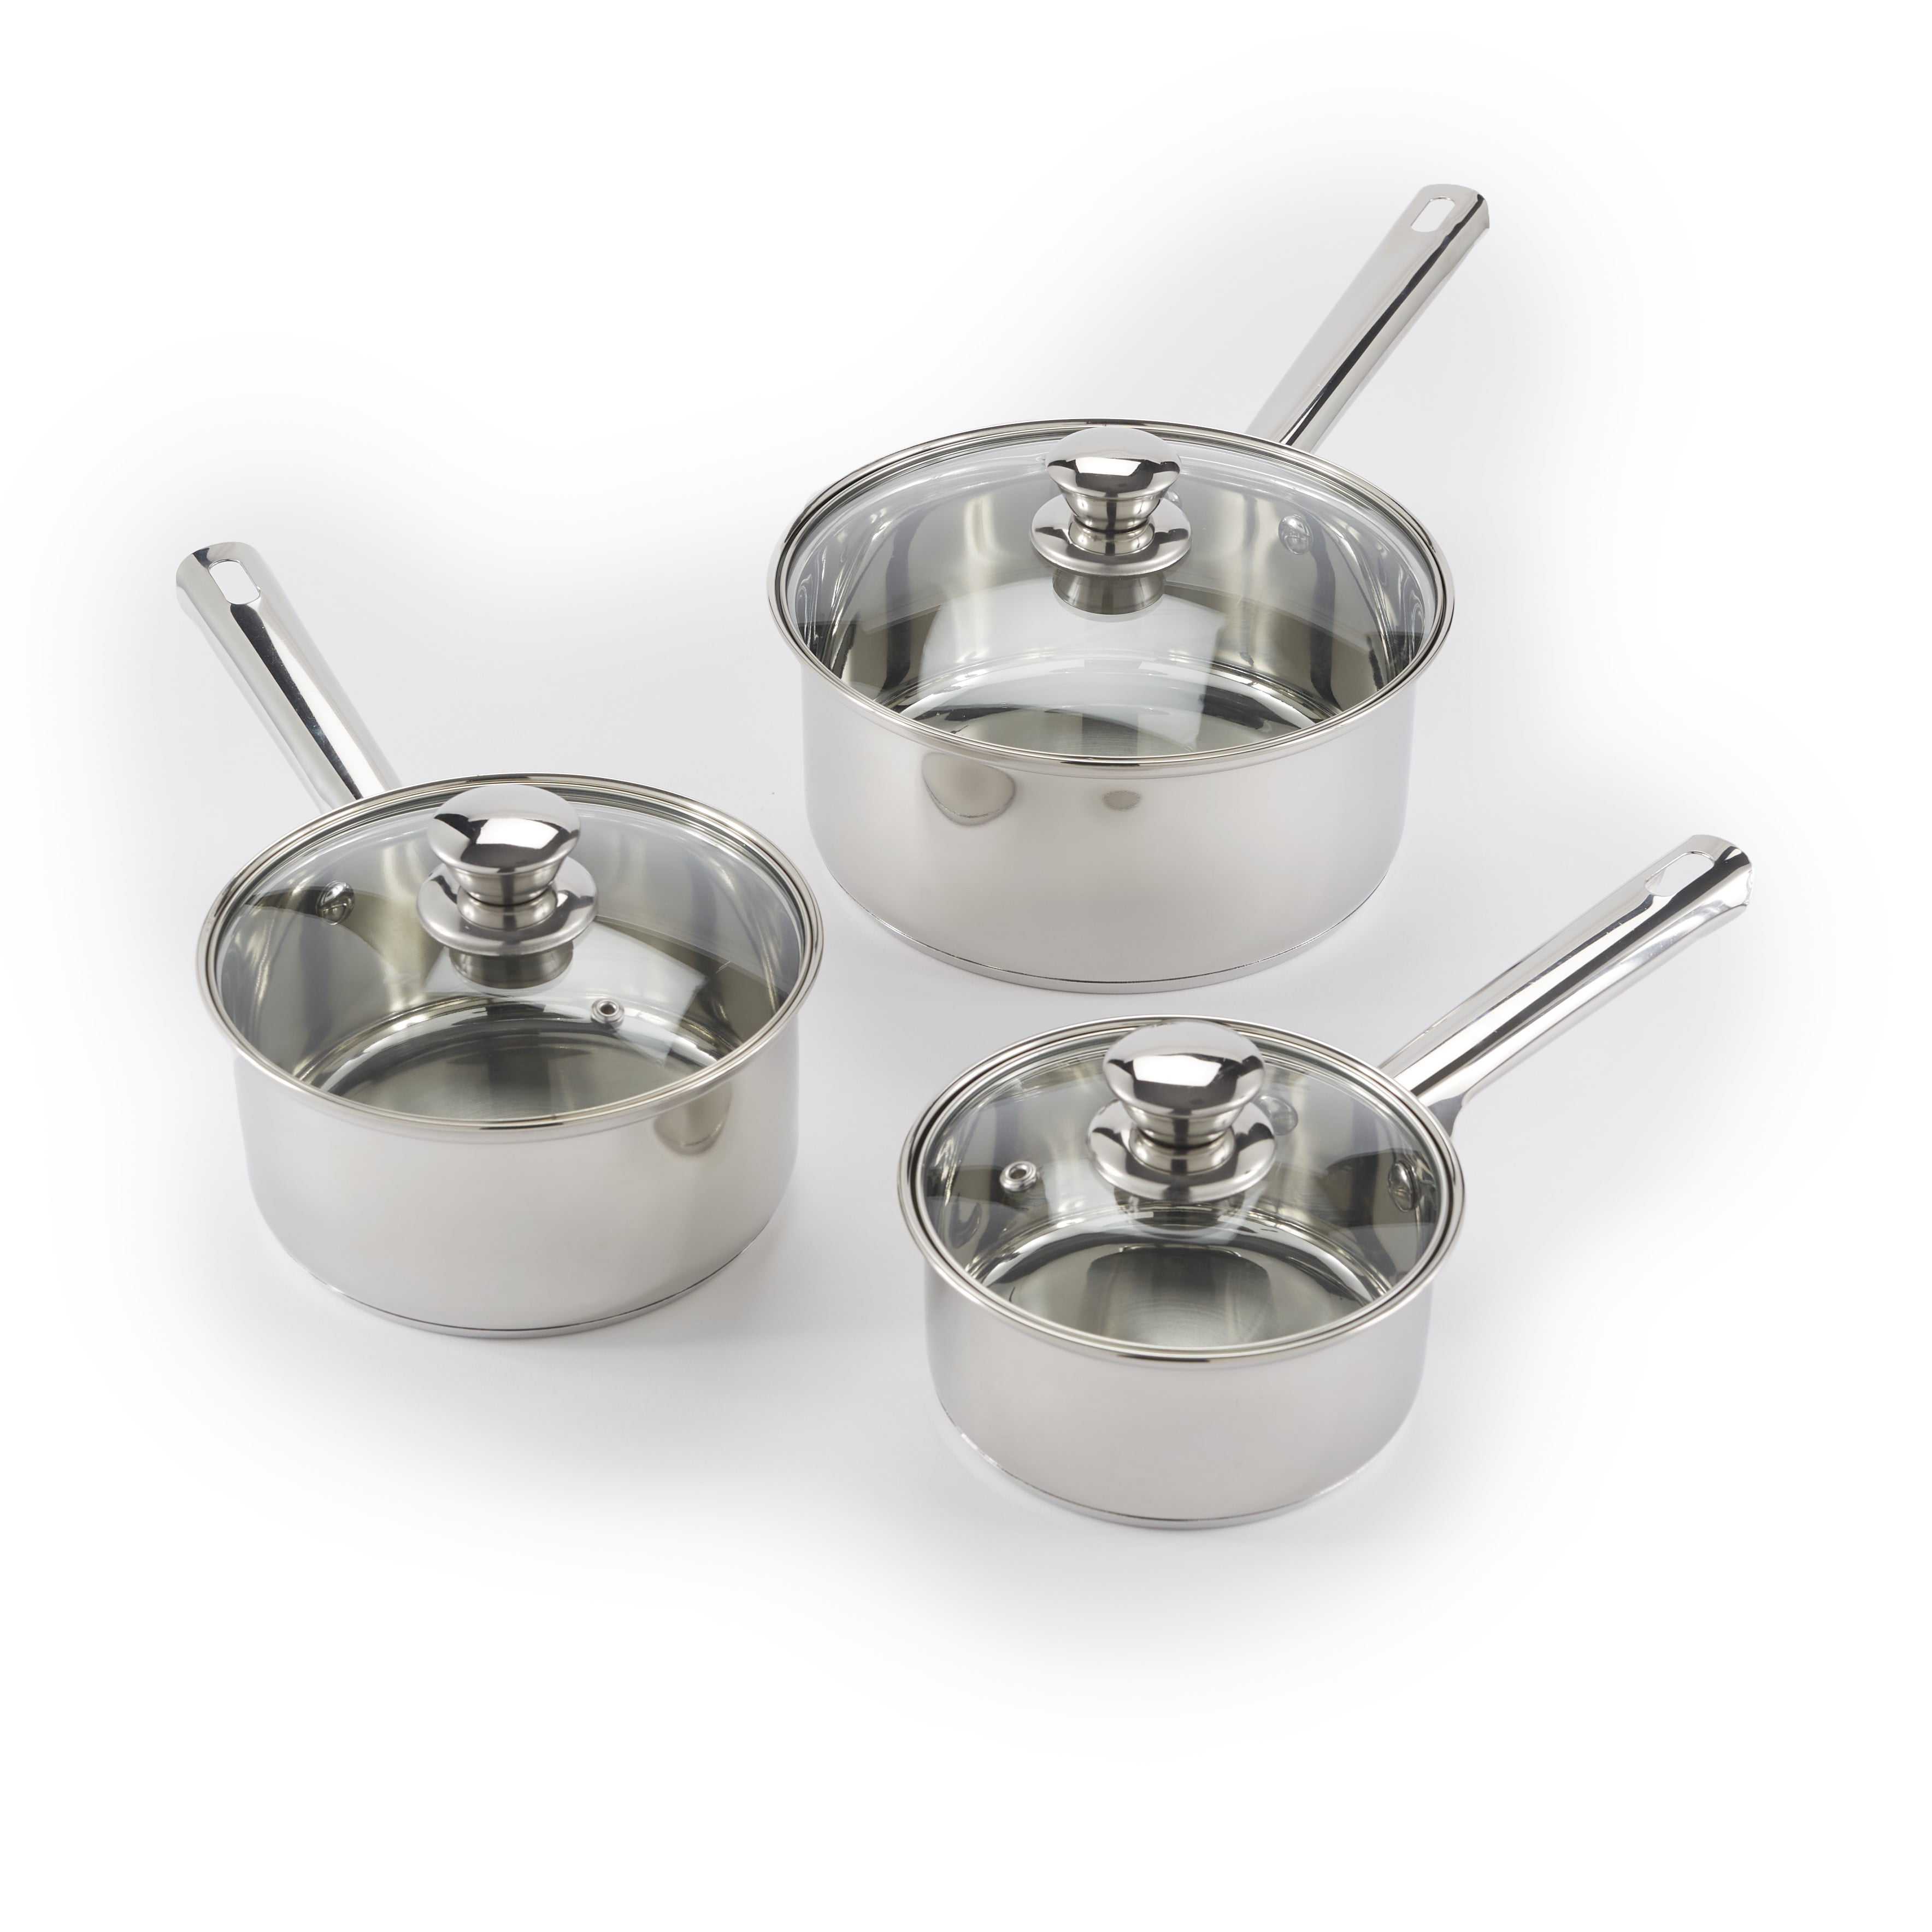 Morphy Richards 5 Piece Stainless Steel Cookware Set Glass Lid Induction Silver 